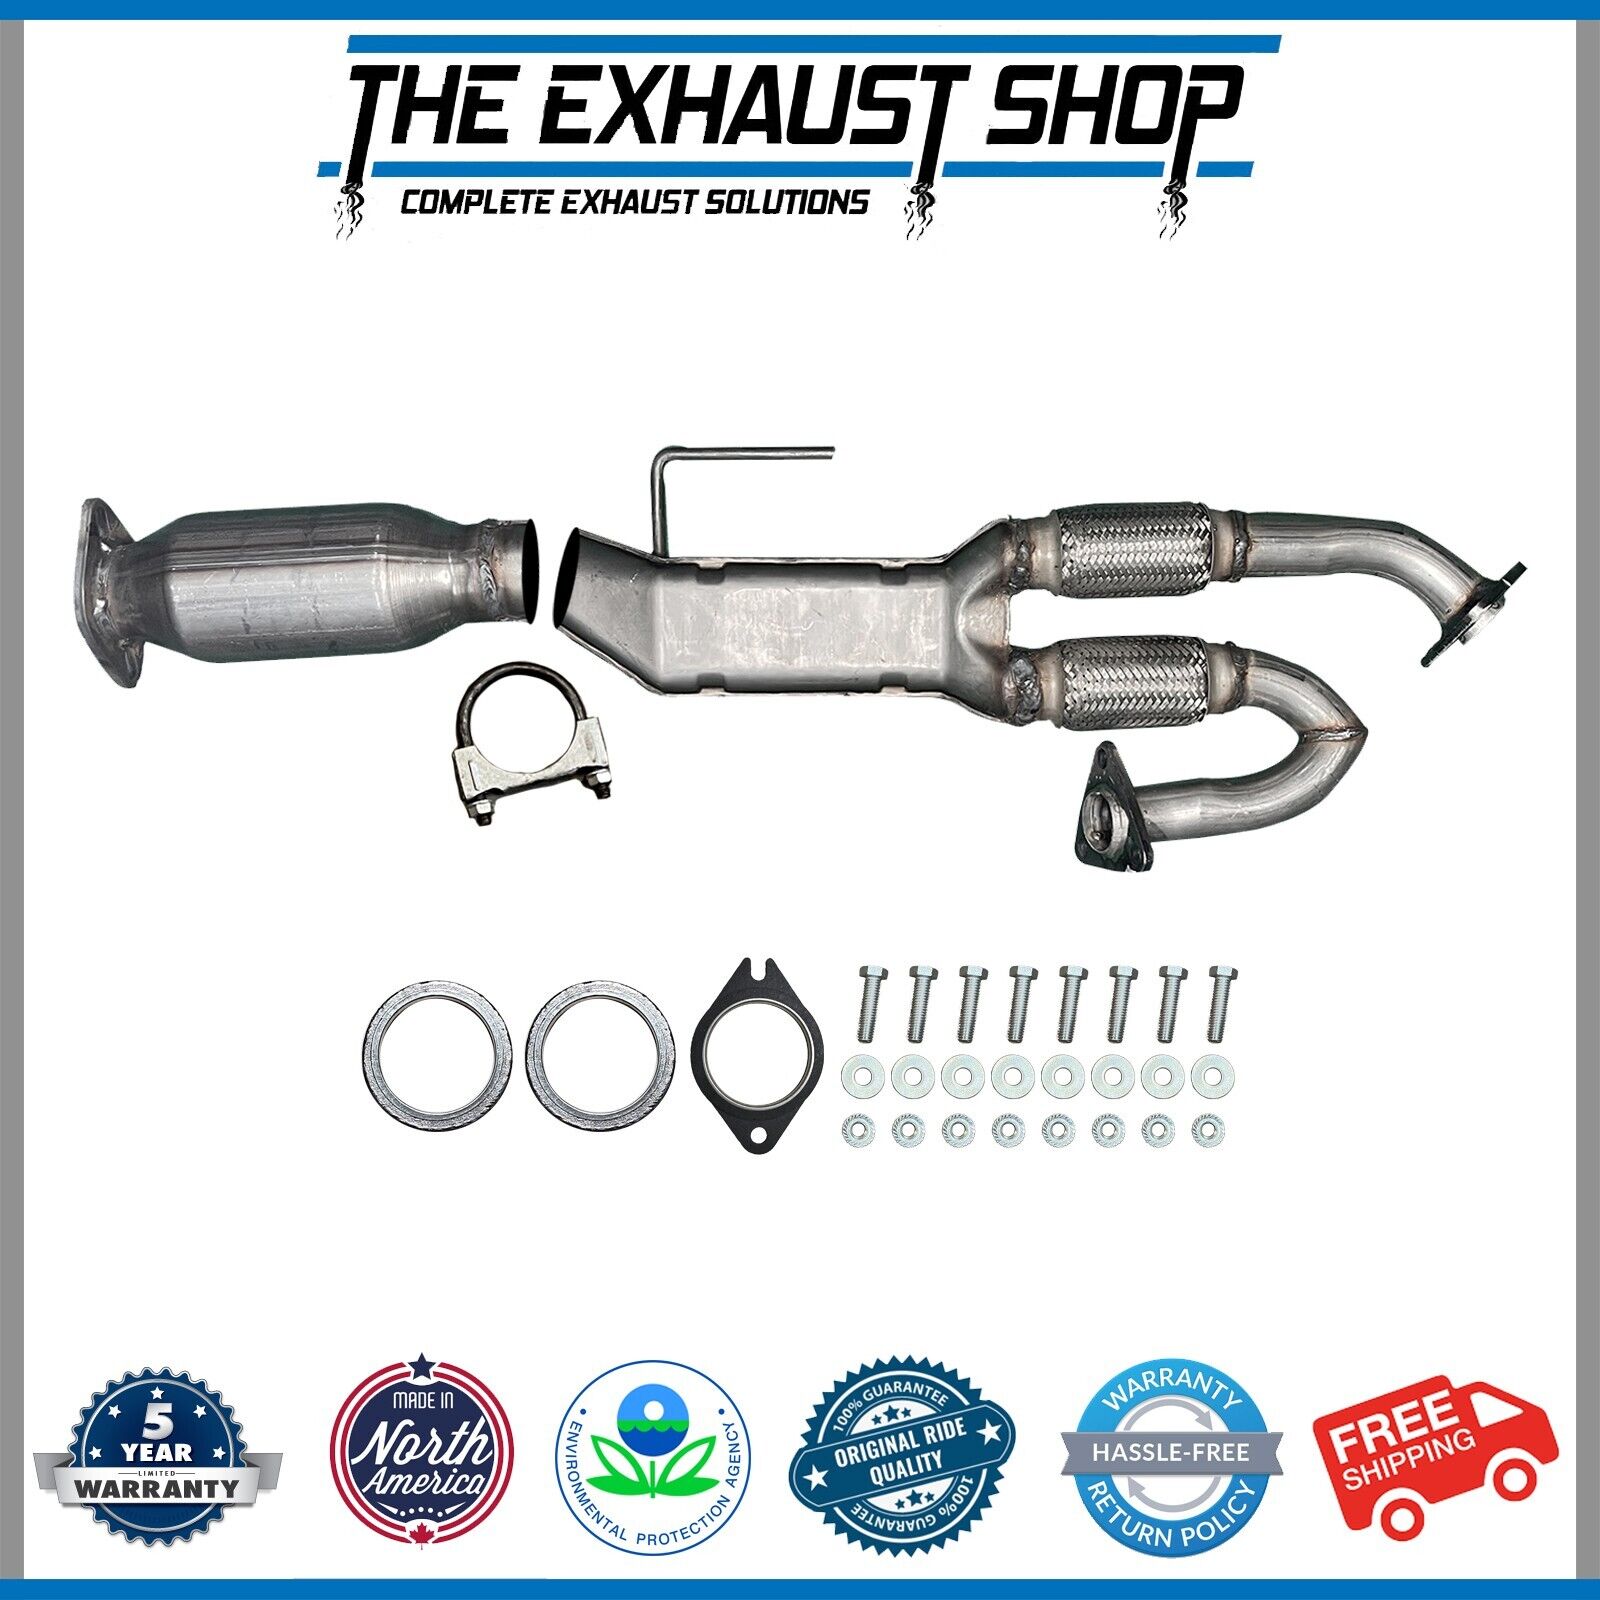 FITS: 2002-2006 NISSAN ALTIMA/QUEST/MAXIMA 3.5L REAR Y-PIPE CATALYTIC CONVERTER